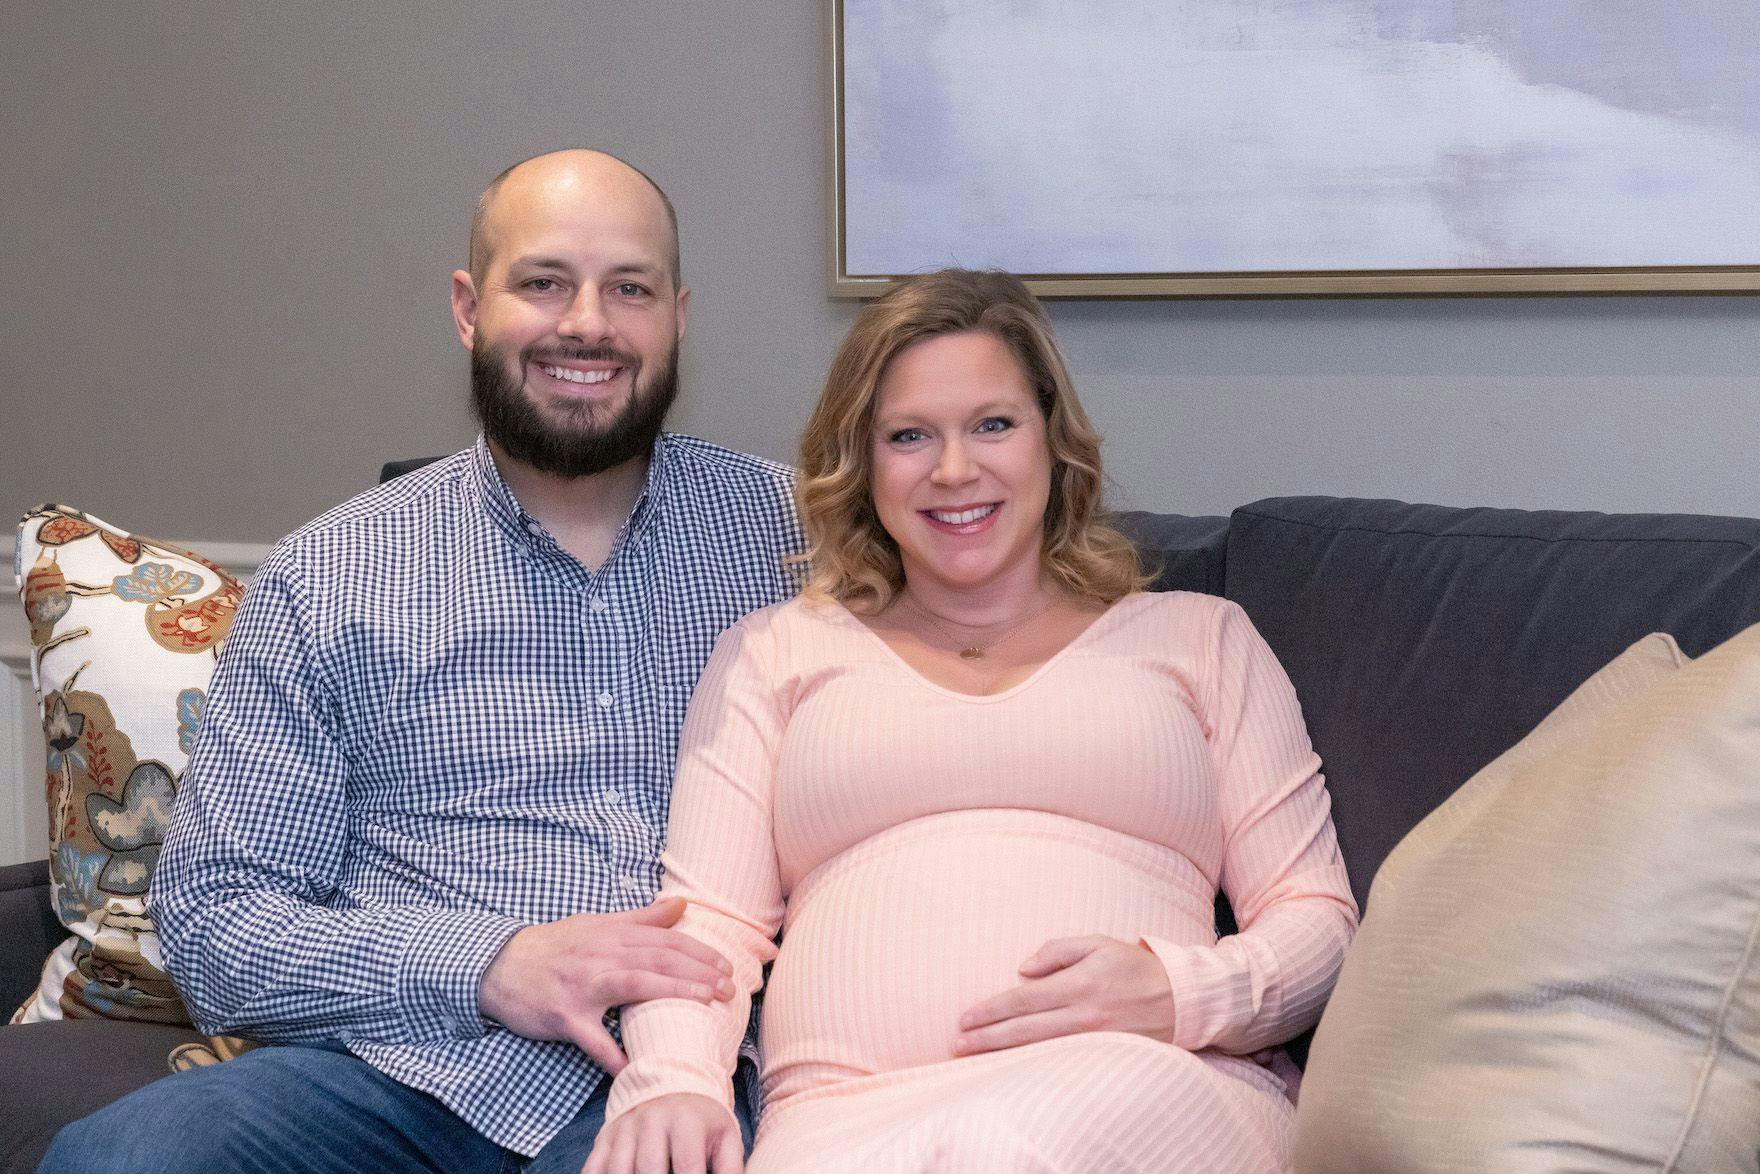 Lung cancer survivor, Daniel Wilson, sitting next to his pregnant wife. Both are smiling at the camera. | Image credit: Robert Barilla 